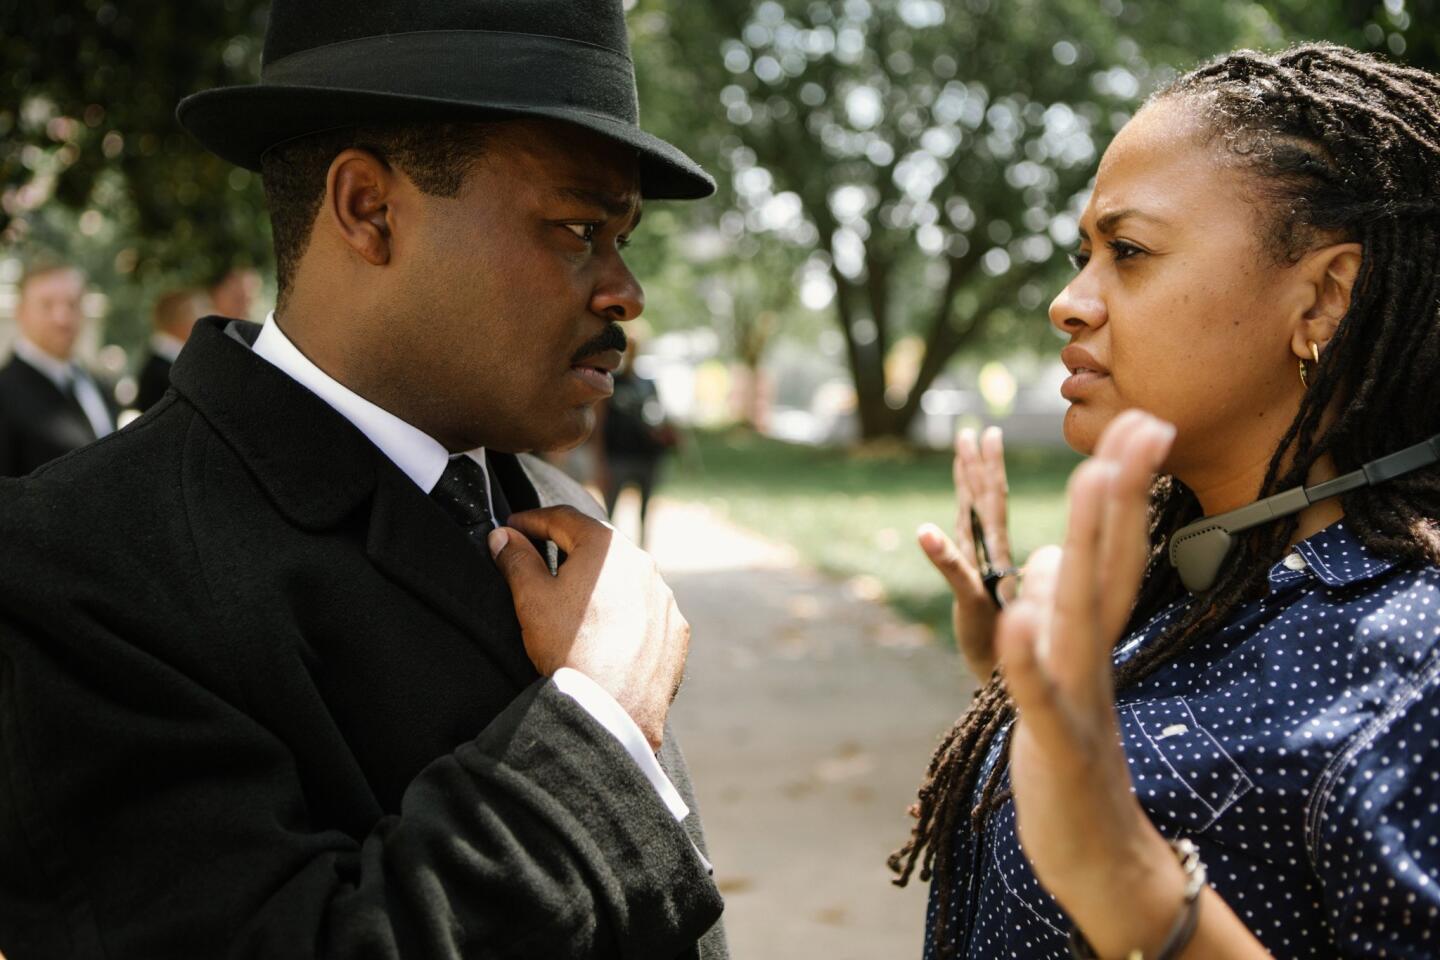 Though the film landed a best picture nomination, it was shut out of every other major category, including snubs for director Ava DuVernay, right, and leading man David Oyelowo. The original song "Glory" got nominated, however.